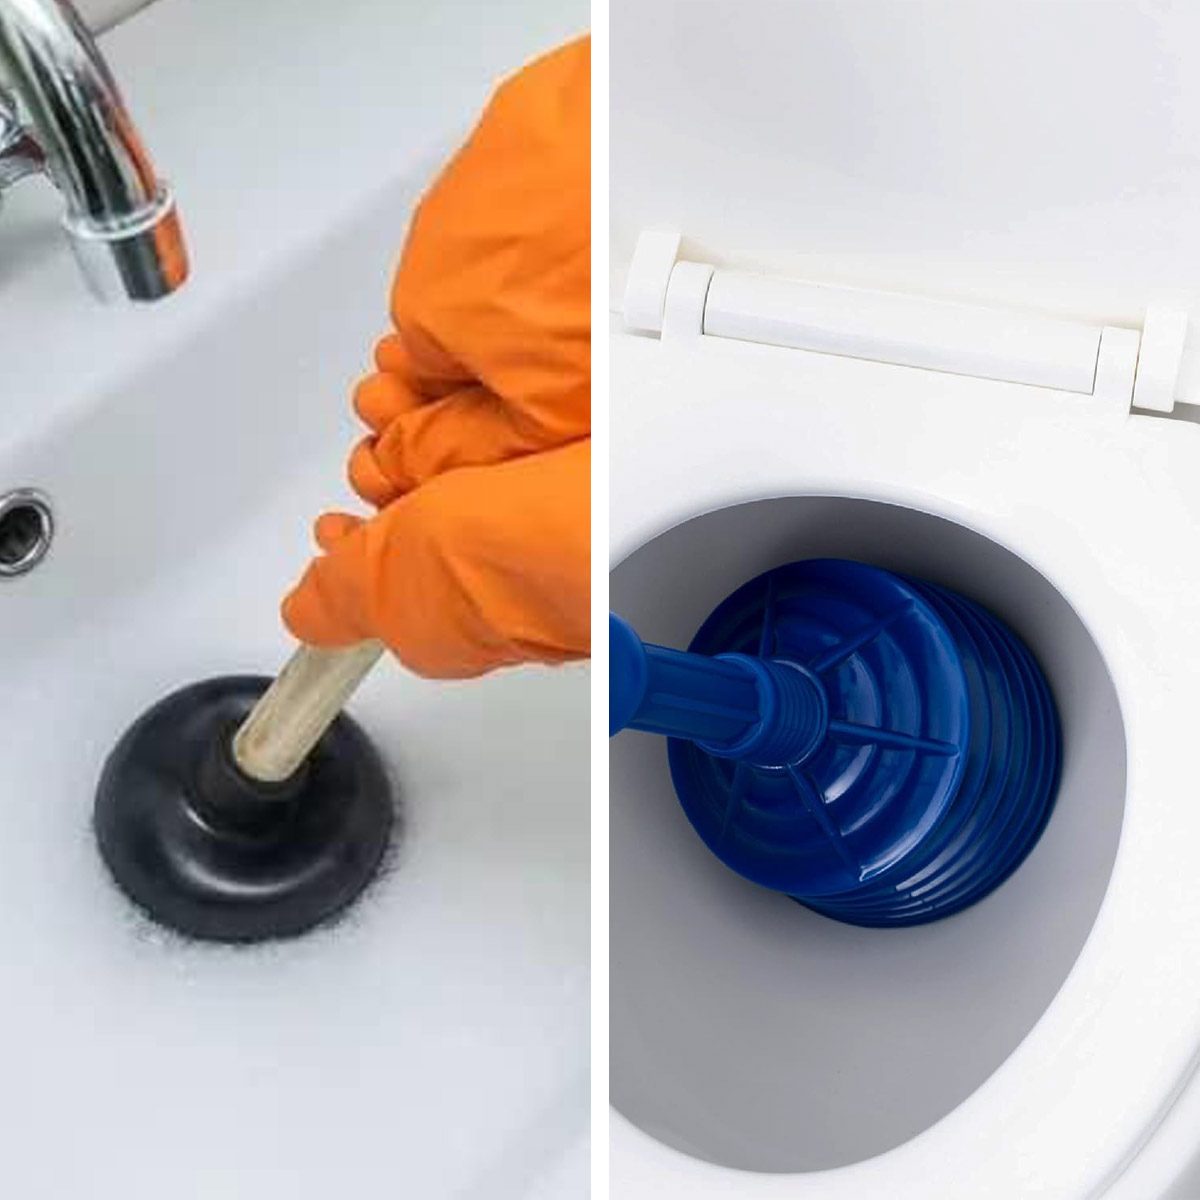 How to Plunge a Toilet or a Sink (sink plunger vs. toilet plunger) 